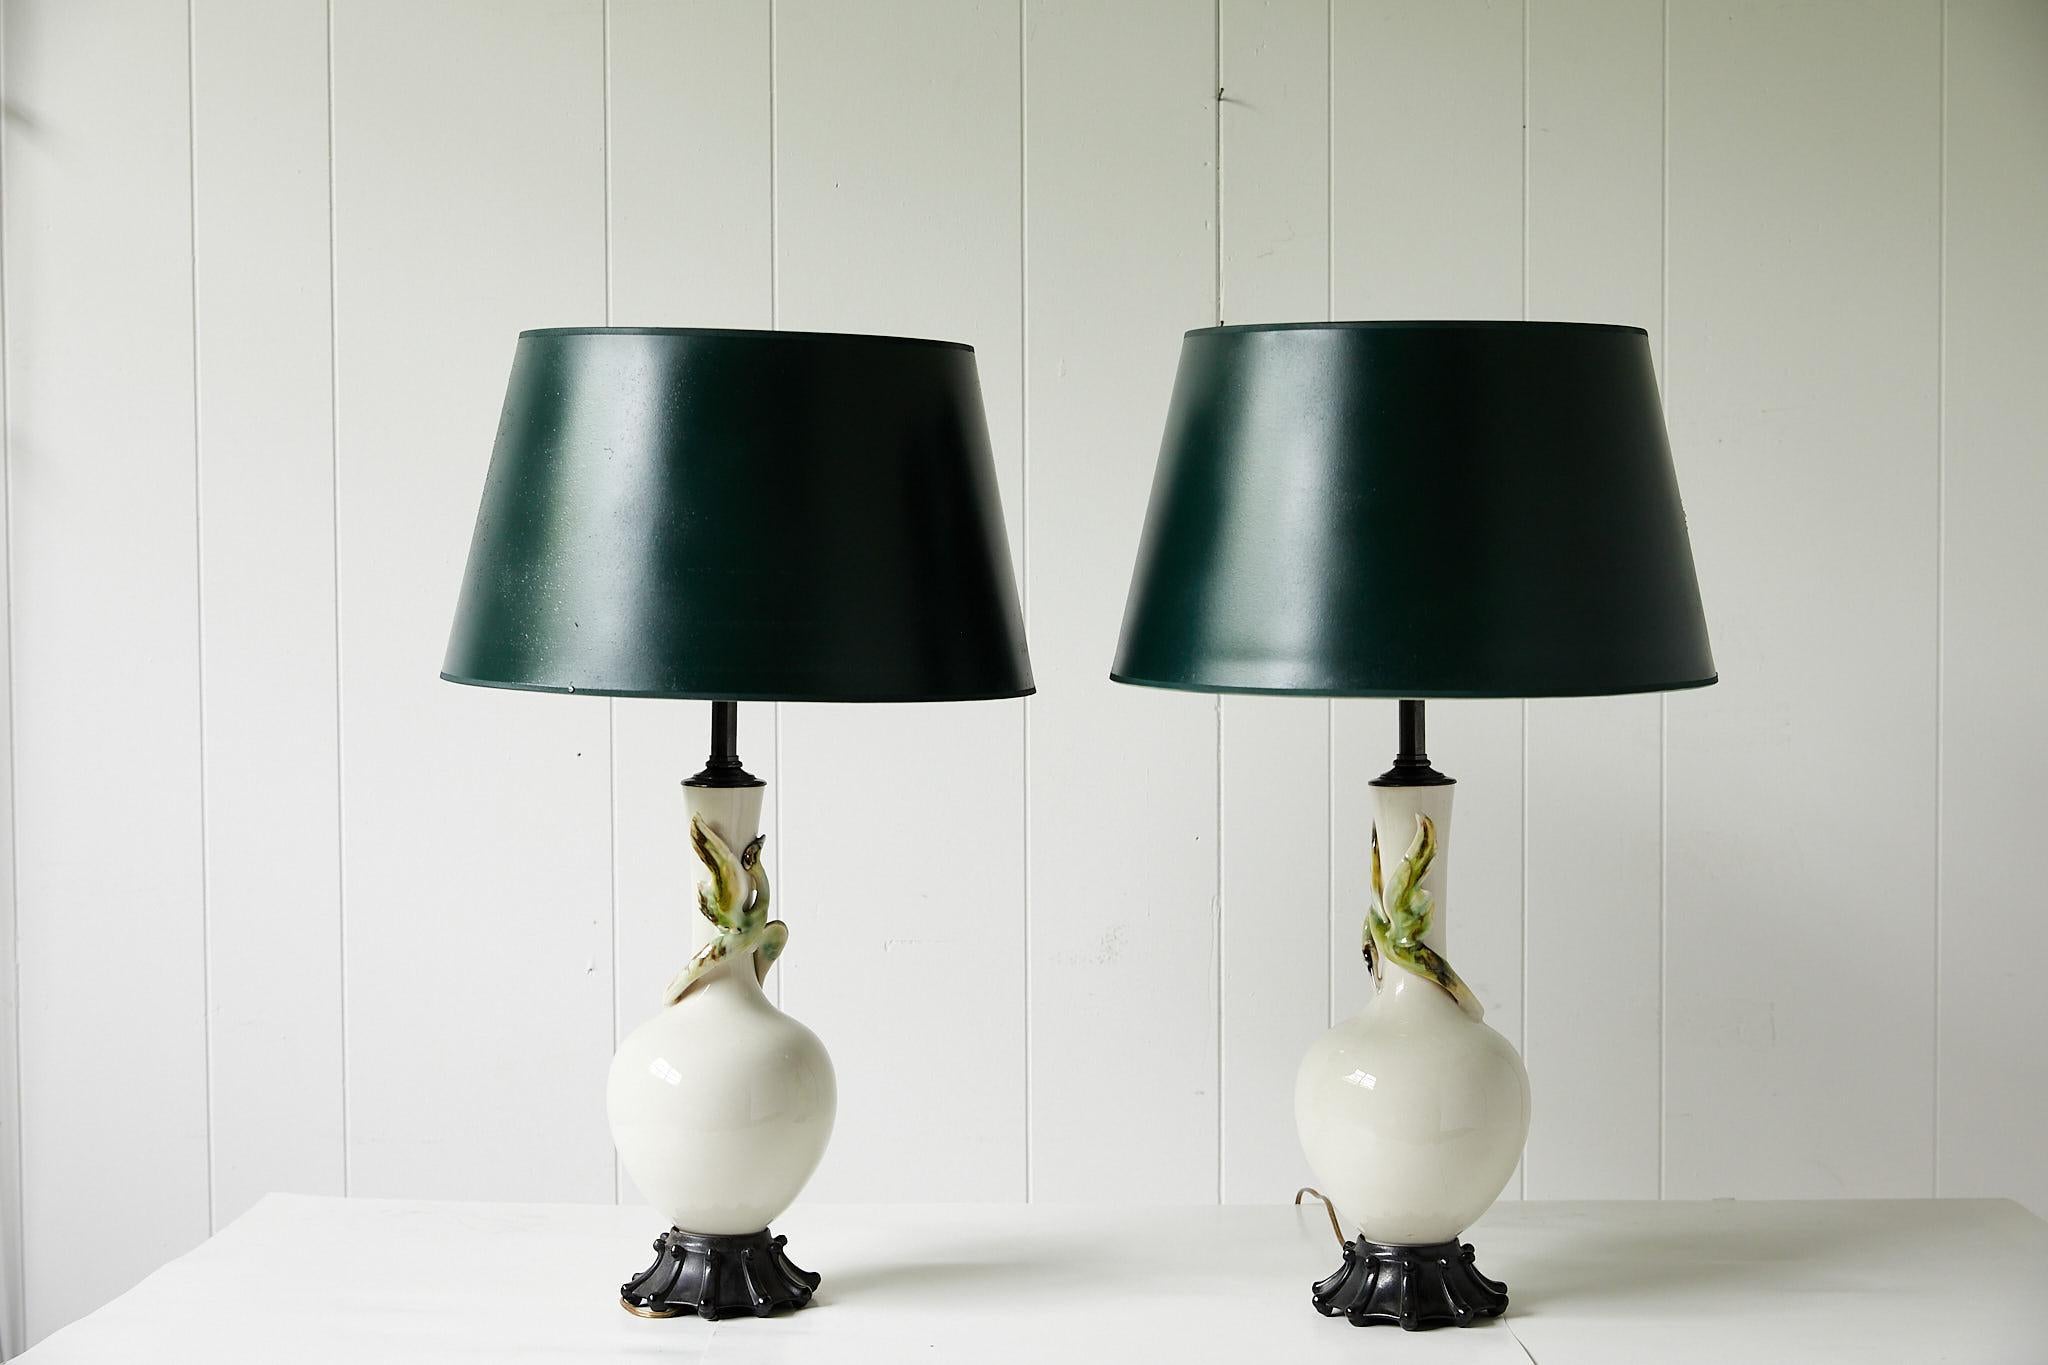 Early 20th century facing pair of lamps made of cream ceramic and in a simple vase form. Each lamp has a slightly different ceramic bird of green and brown tones decorating it's neck. The lamps are mounted on carved wooden bases and topped with